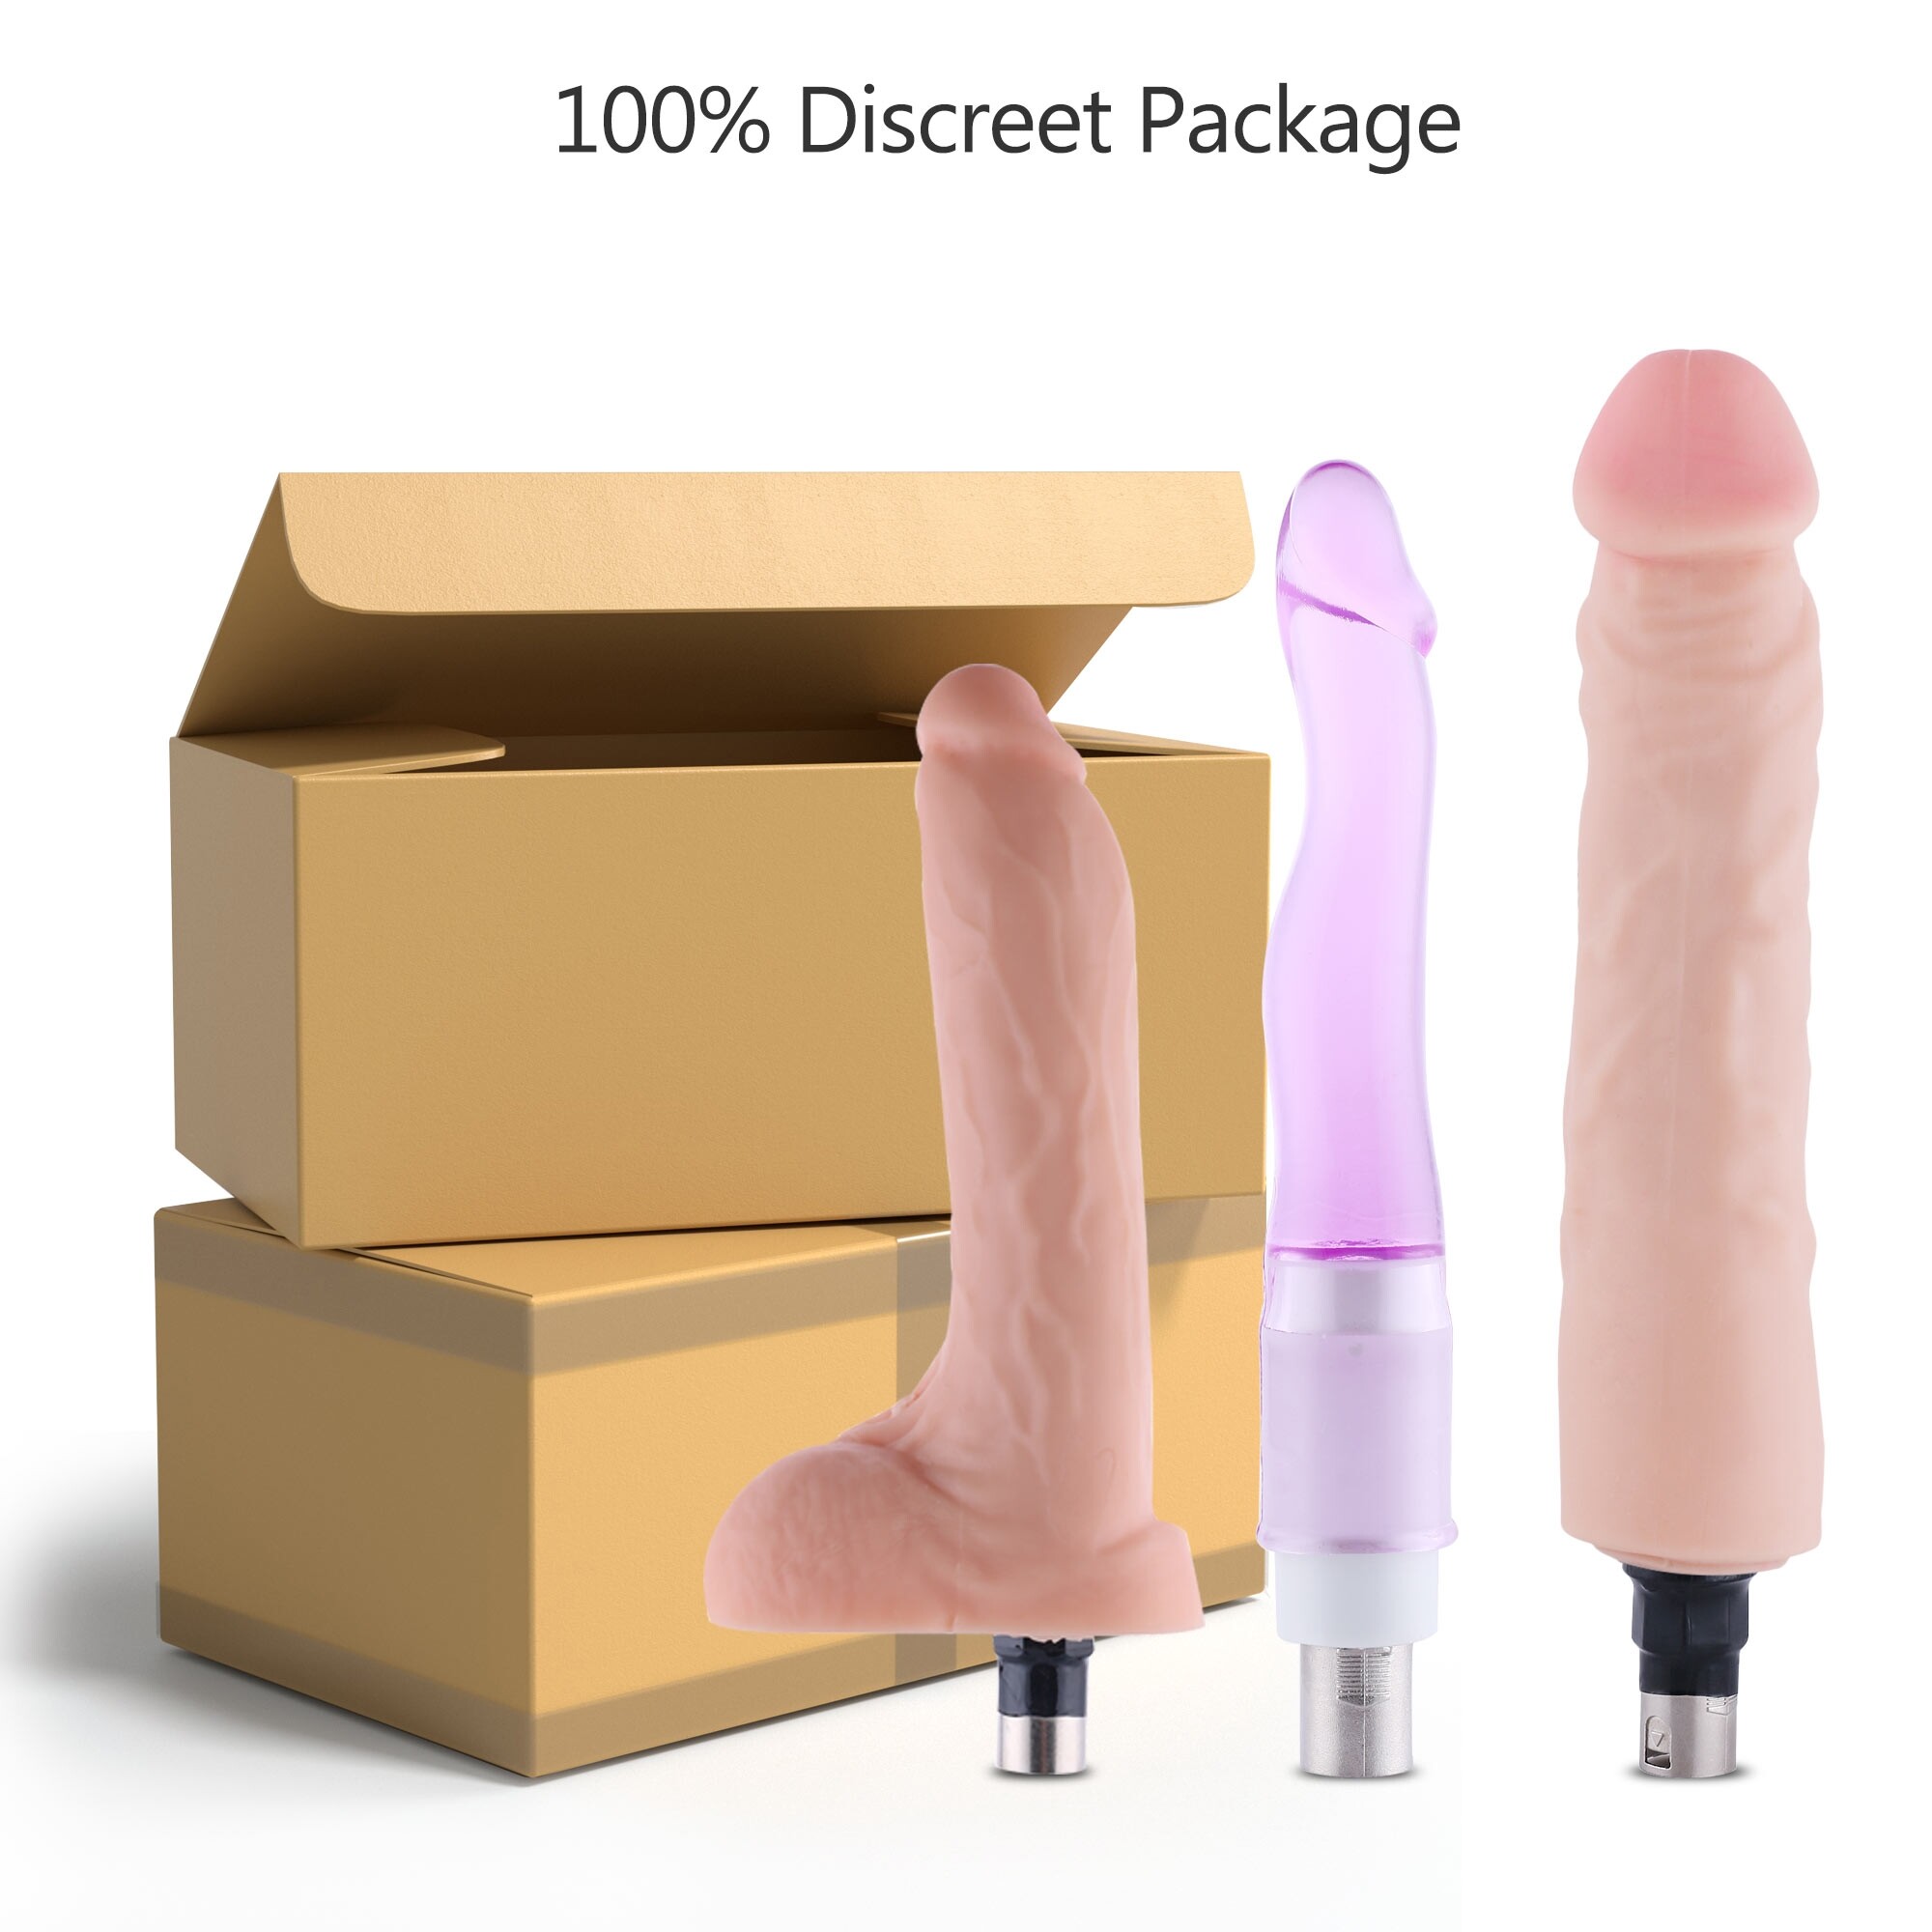 3XLR Realistic Anal Dildo For Women And Man